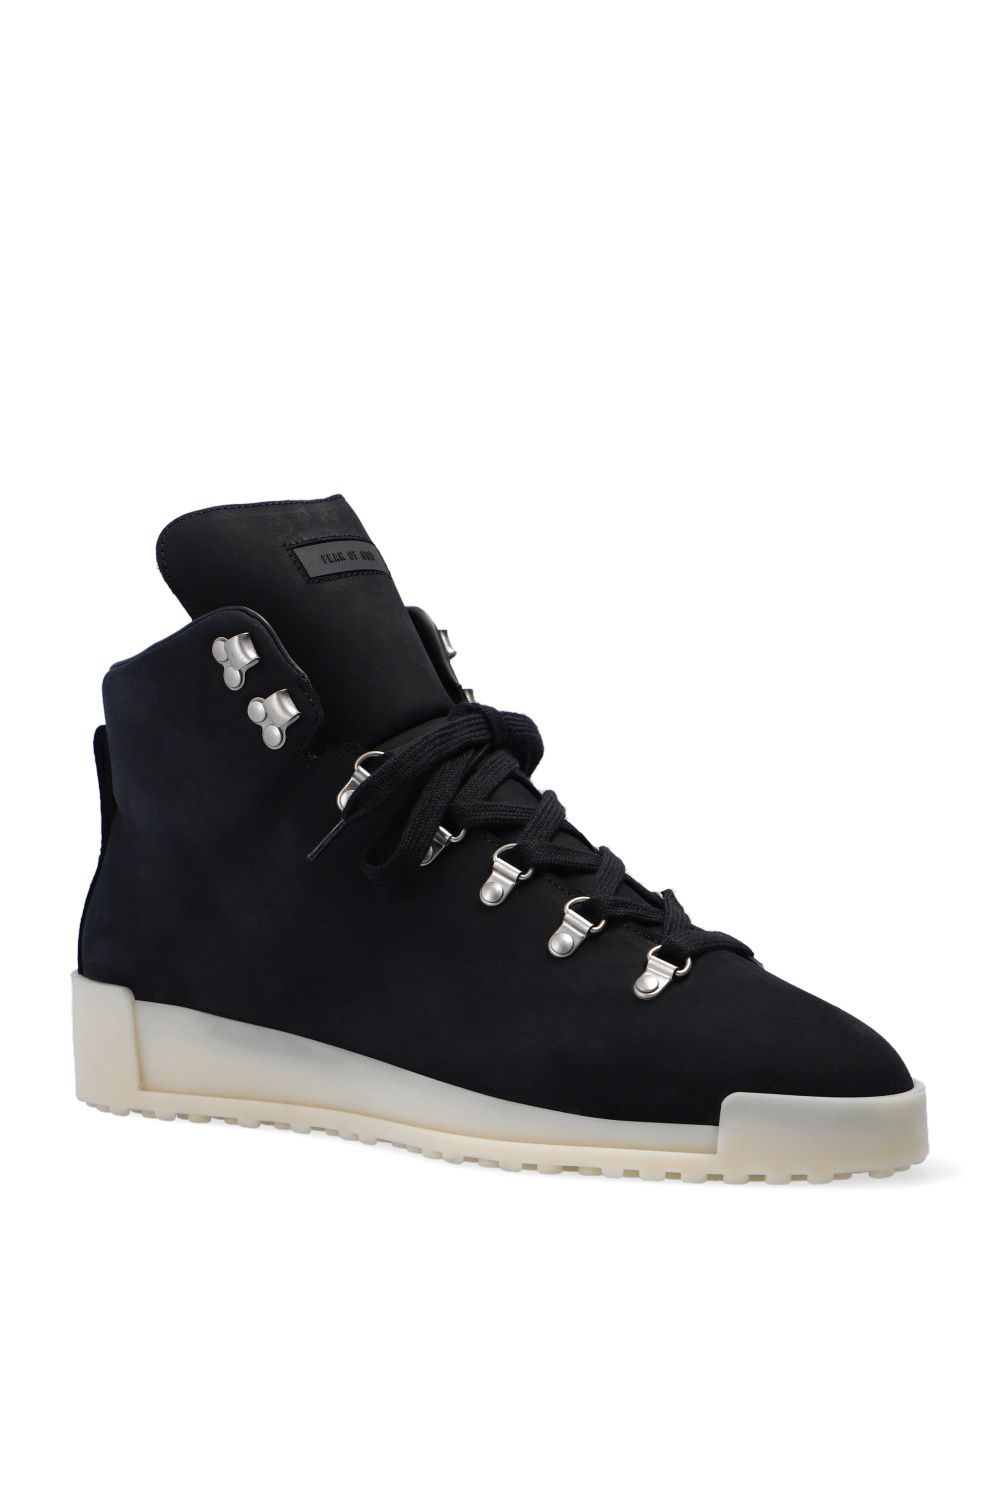 SWEAR 'Air Revive Nitro' Sneakers Rosa ‘7th Hiker’ boots